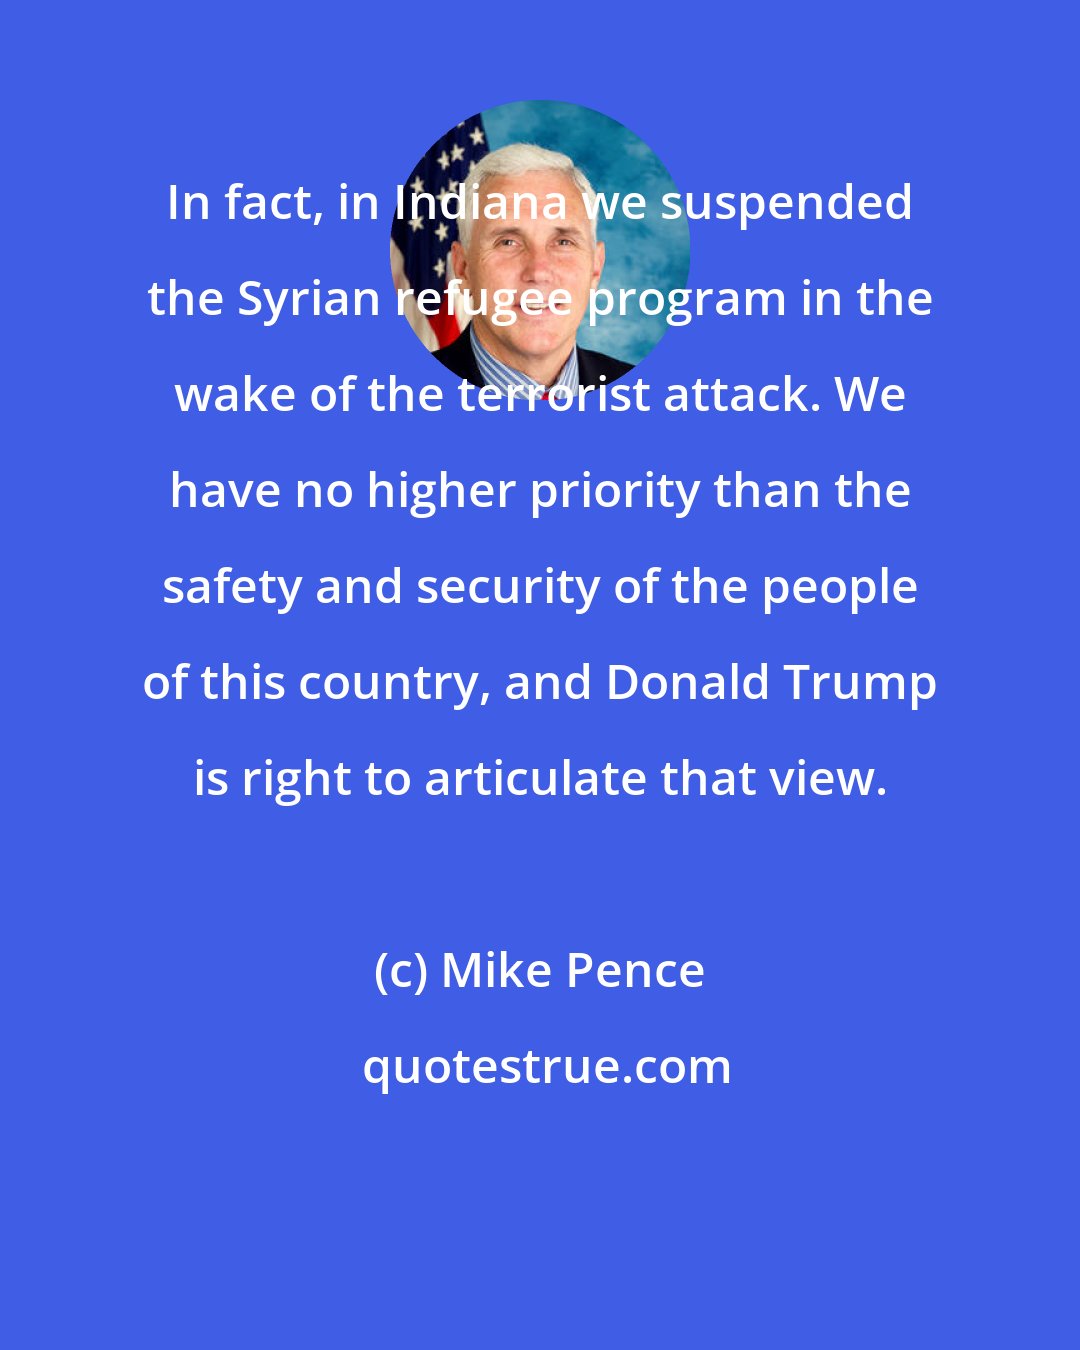 Mike Pence: In fact, in Indiana we suspended the Syrian refugee program in the wake of the terrorist attack. We have no higher priority than the safety and security of the people of this country, and Donald Trump is right to articulate that view.